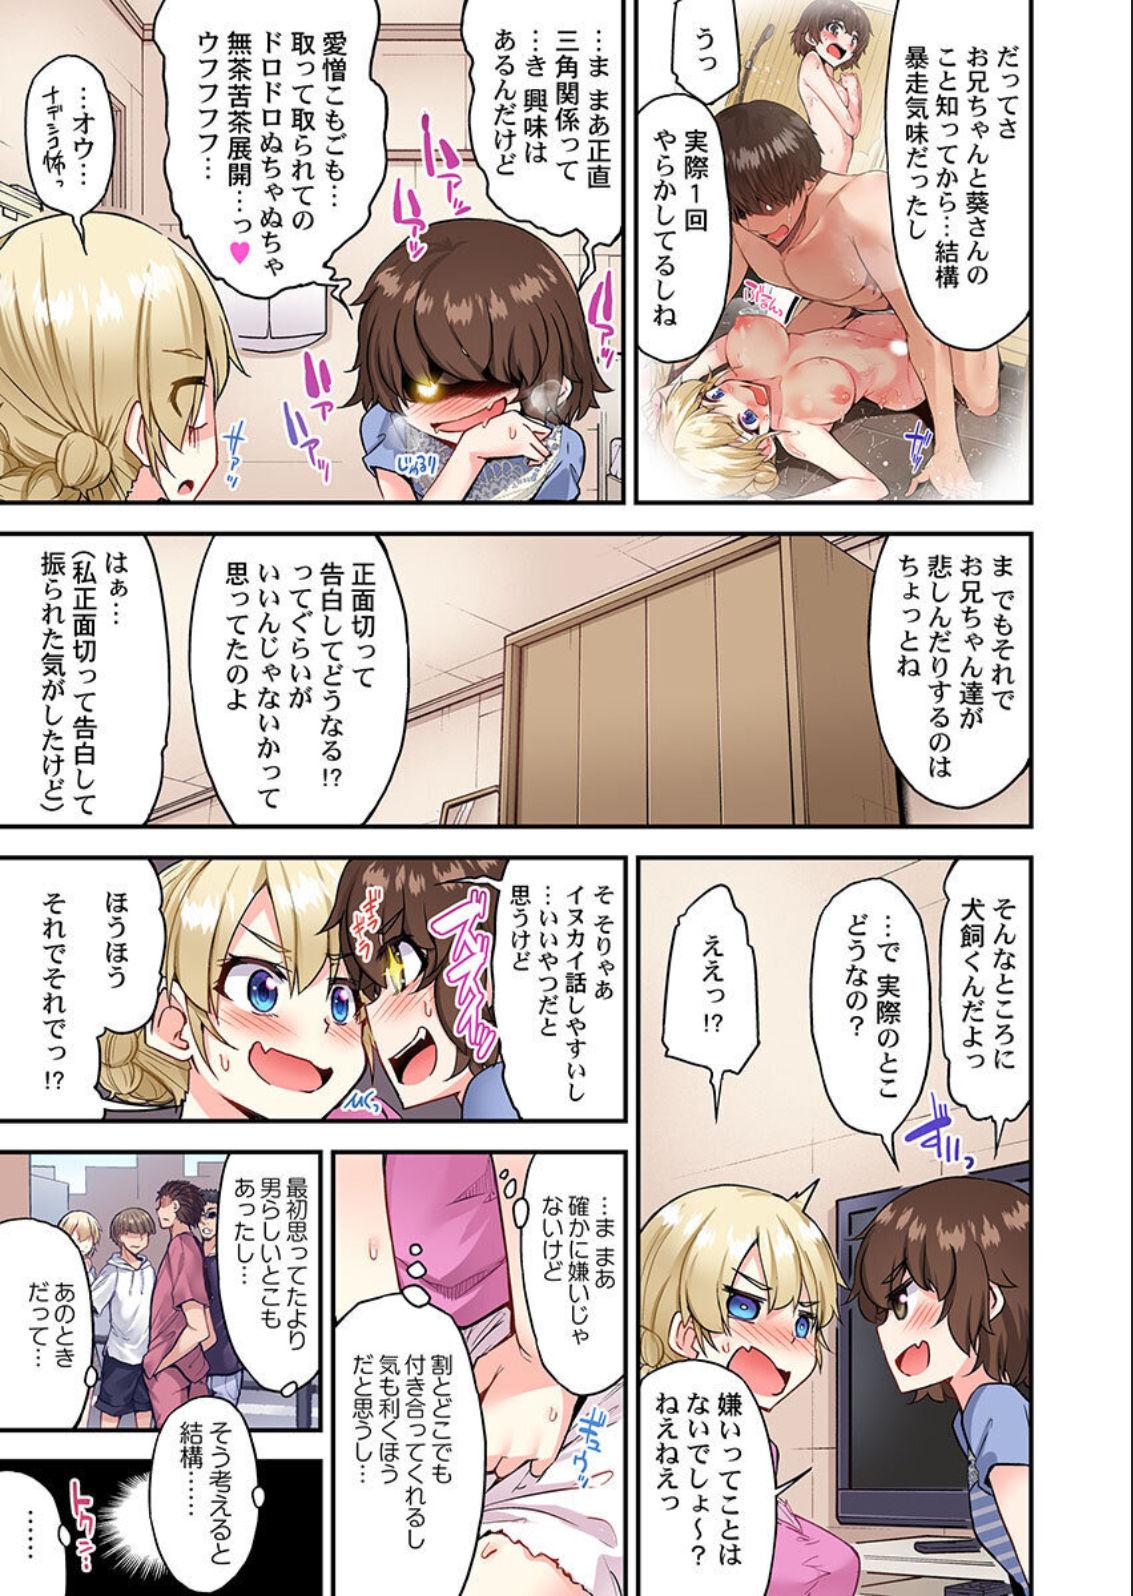 Anal Gape Traditional Job of Washing Girls' Body Ch. 45 - 48 Prostitute - Page 6